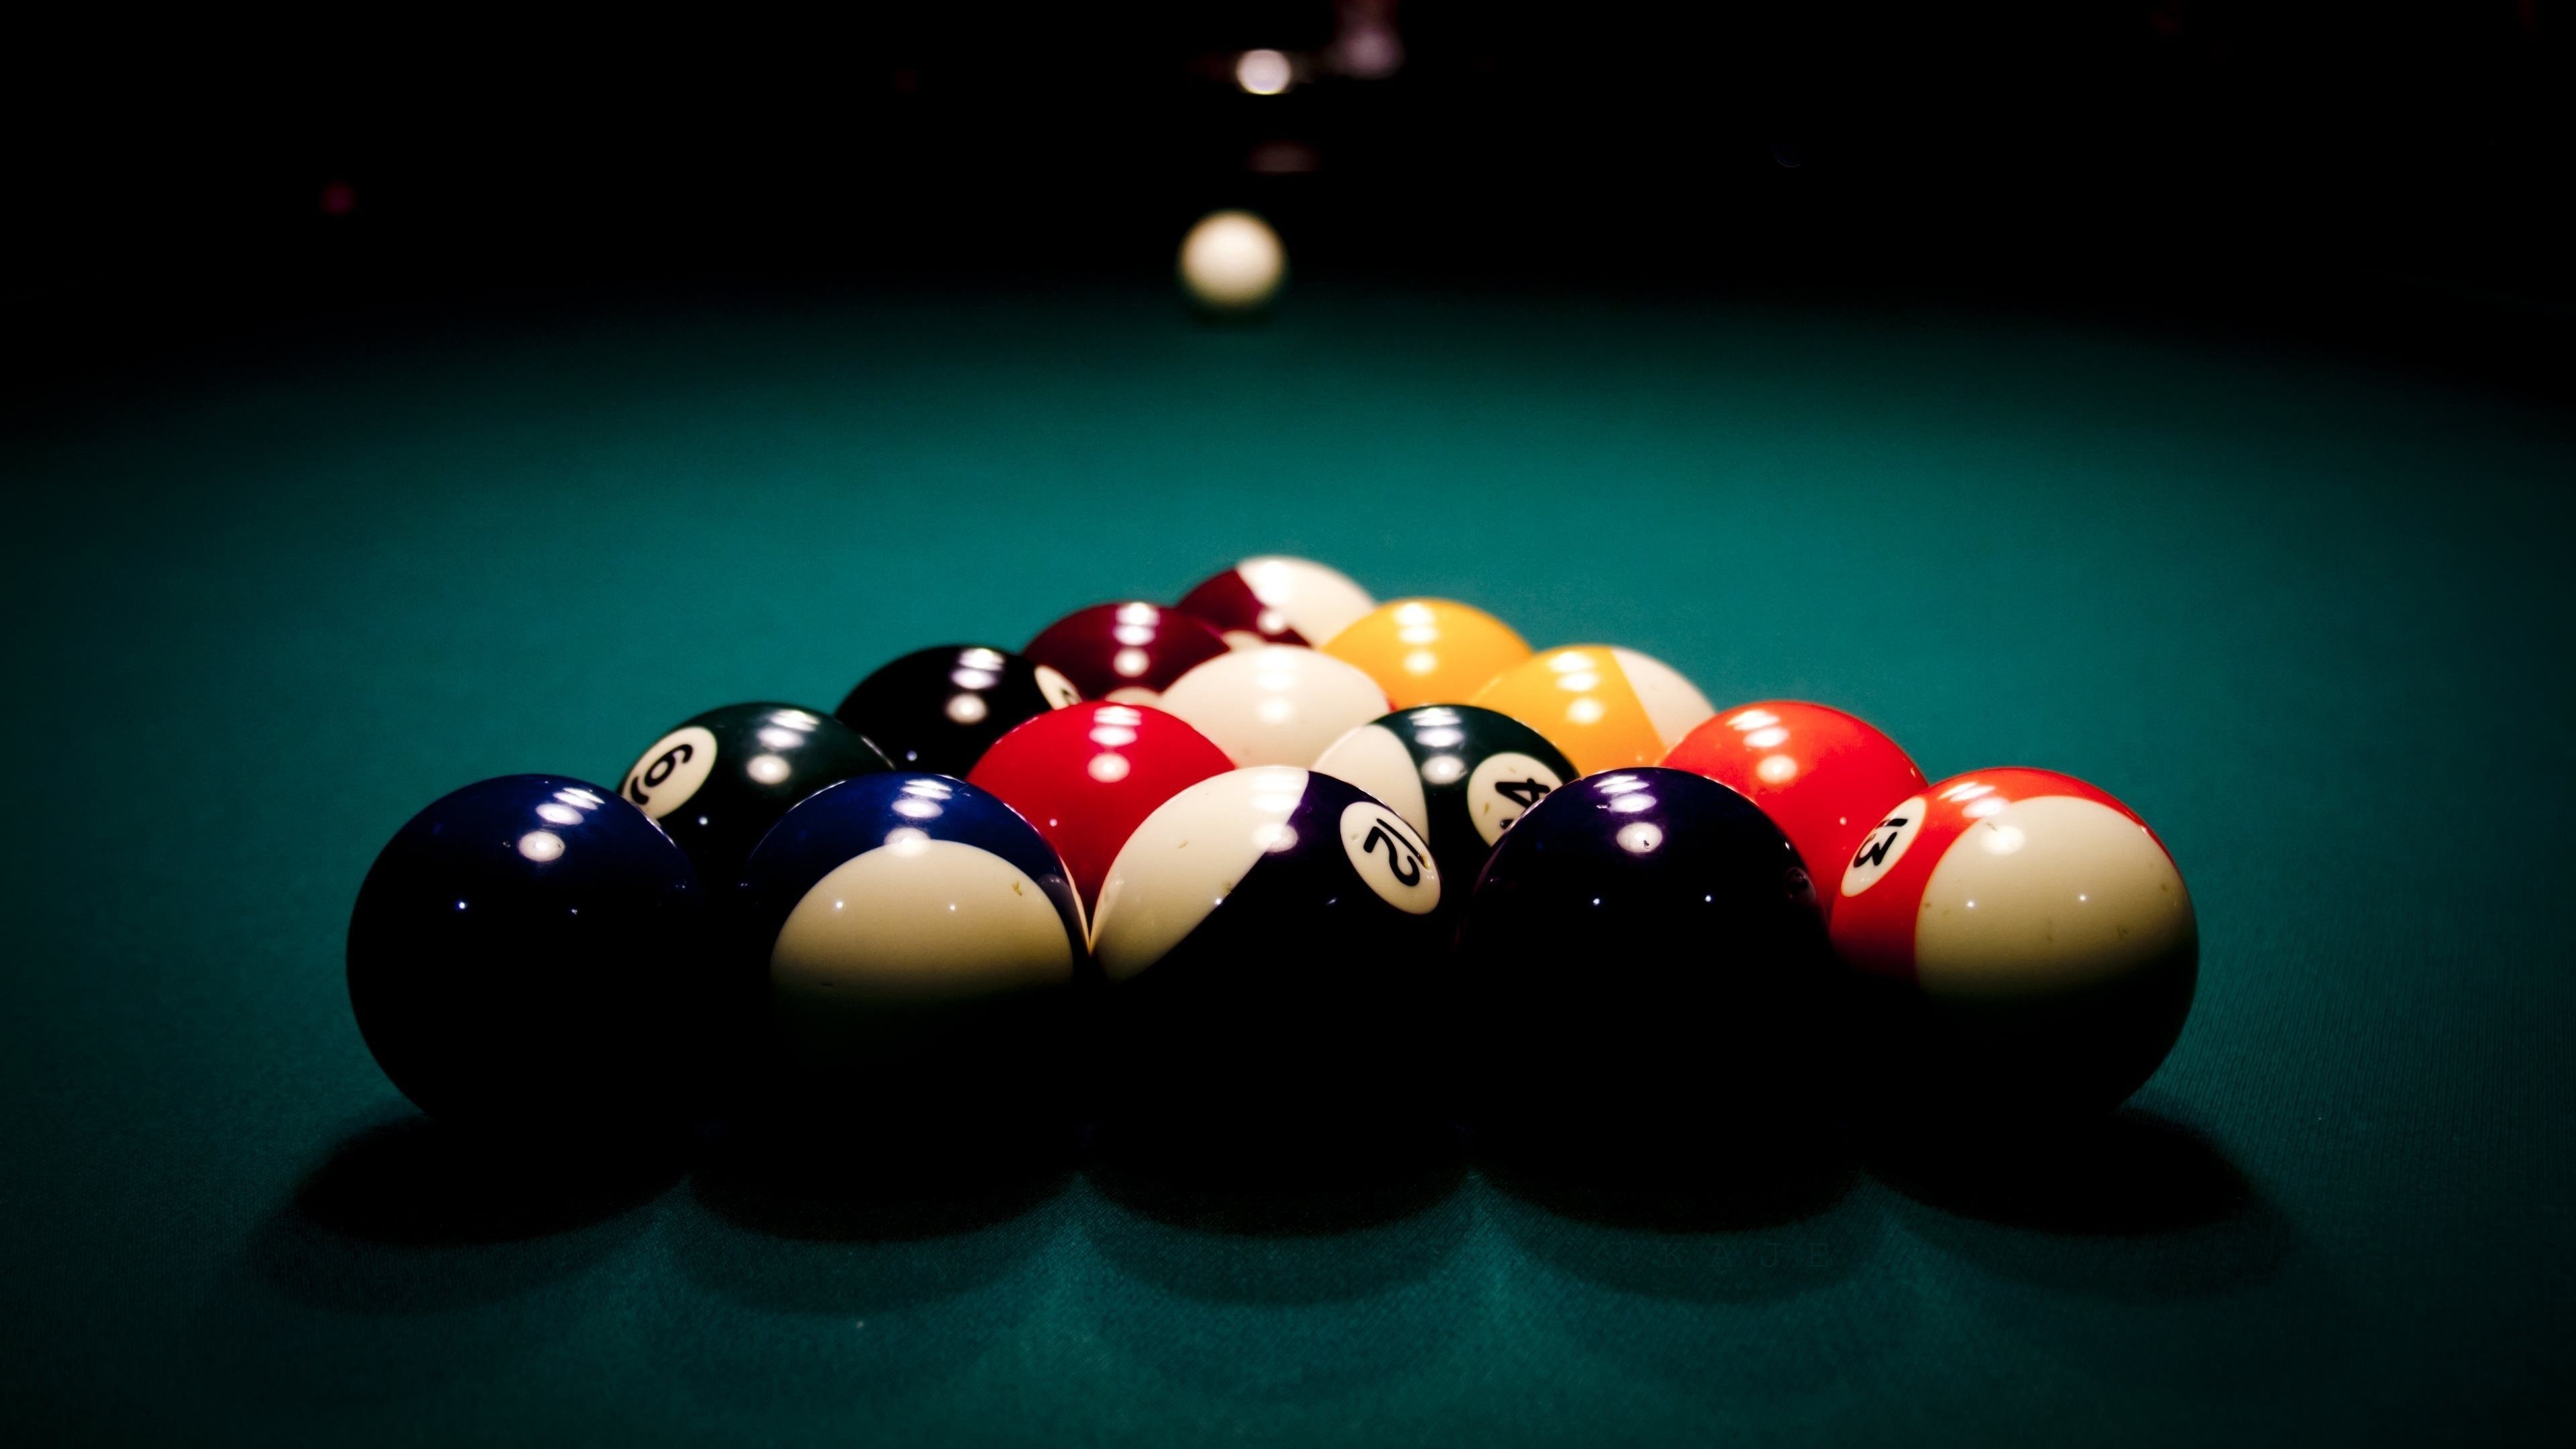 Pool (Cue Sports): A competitive and recreational sport played on a table with six pockets along the rails, into which balls are deposited. 3840x2160 4K Wallpaper.